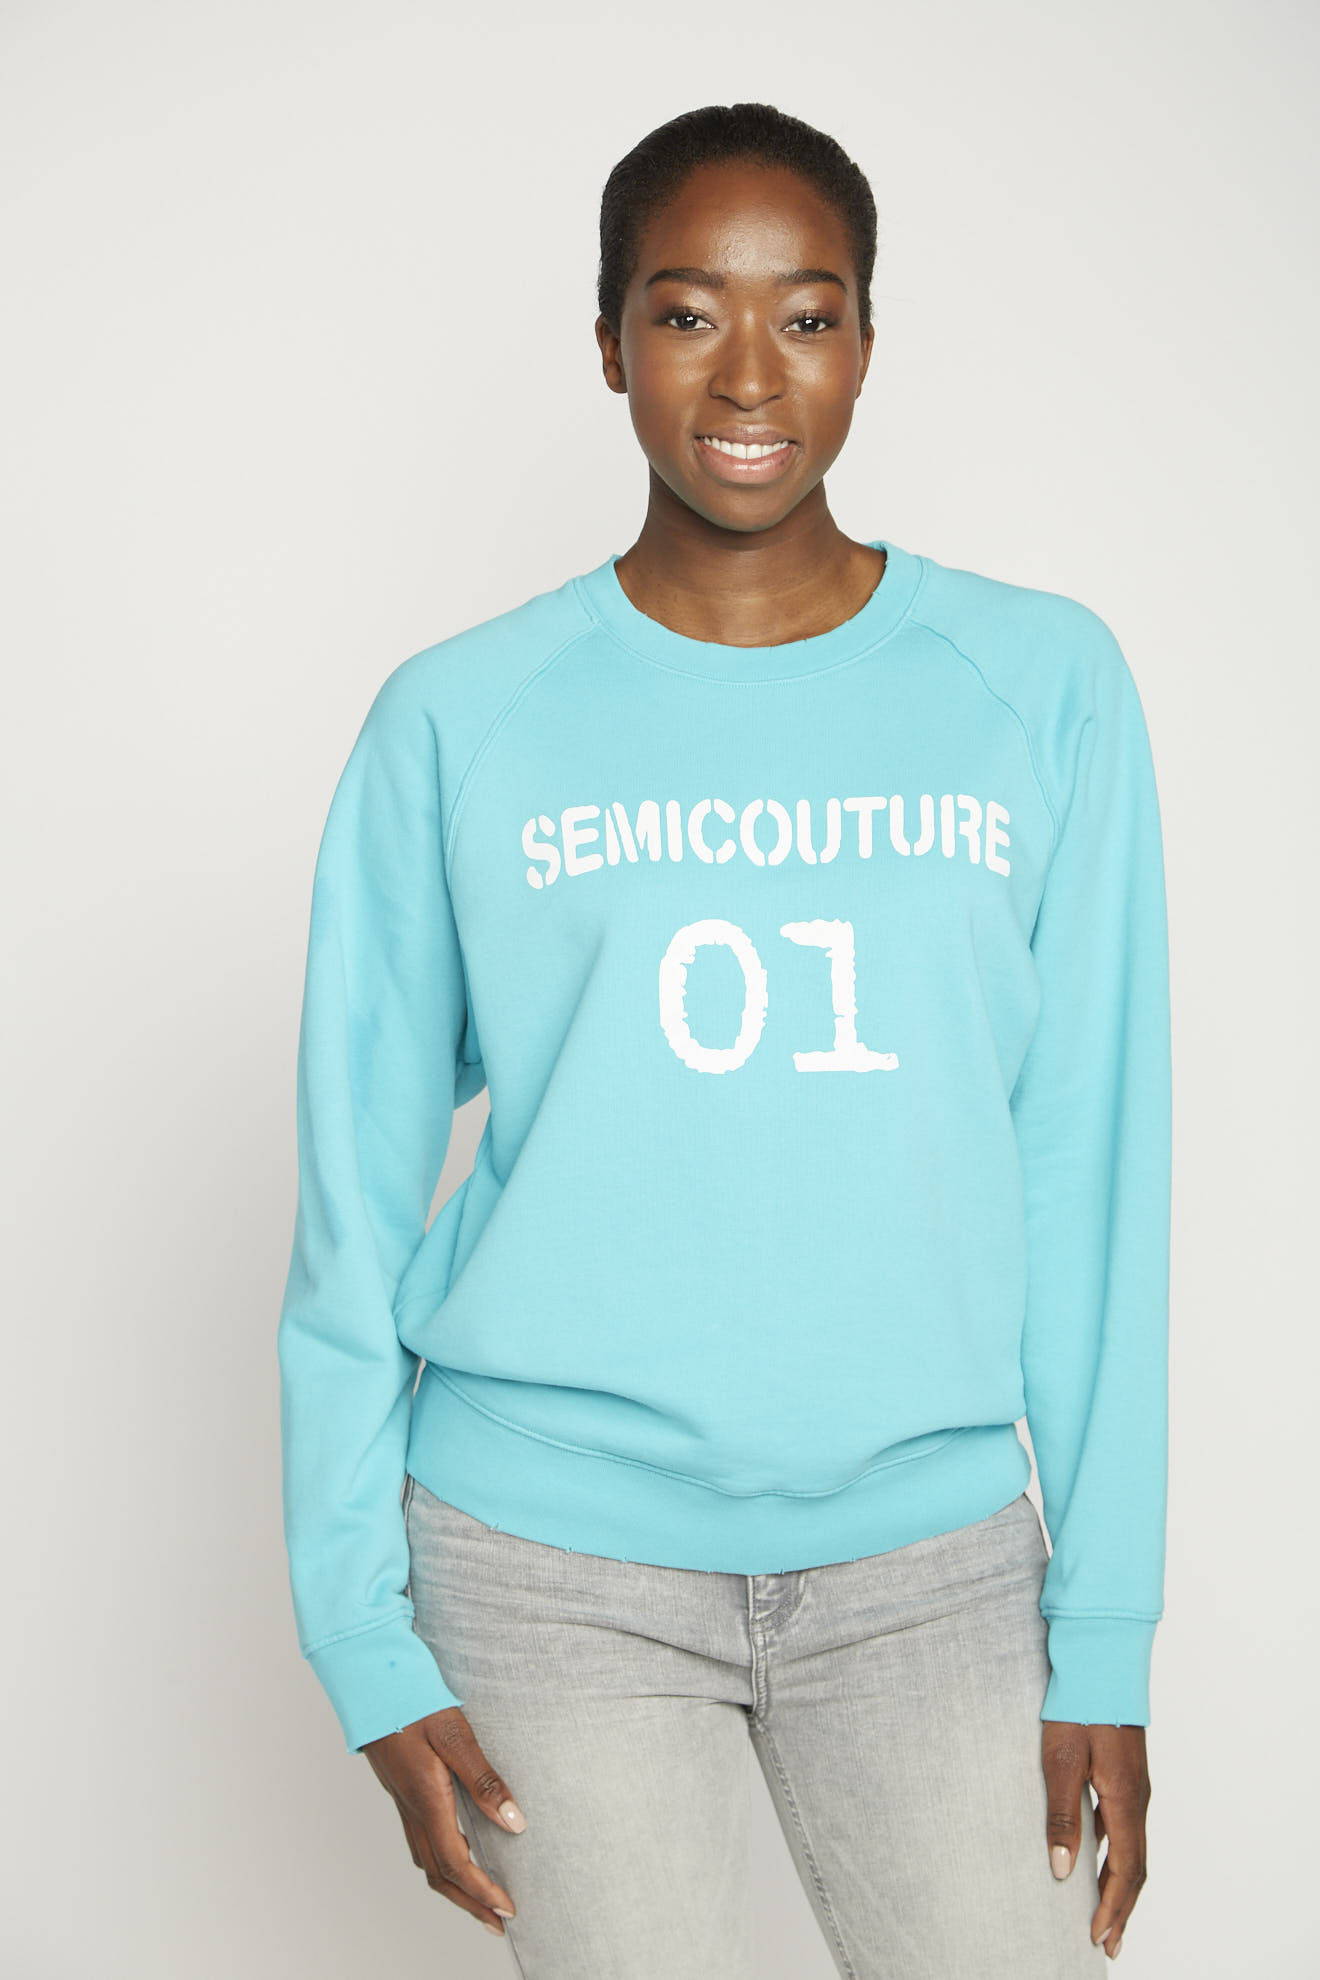 semicouture sweater blue branded cotton model front